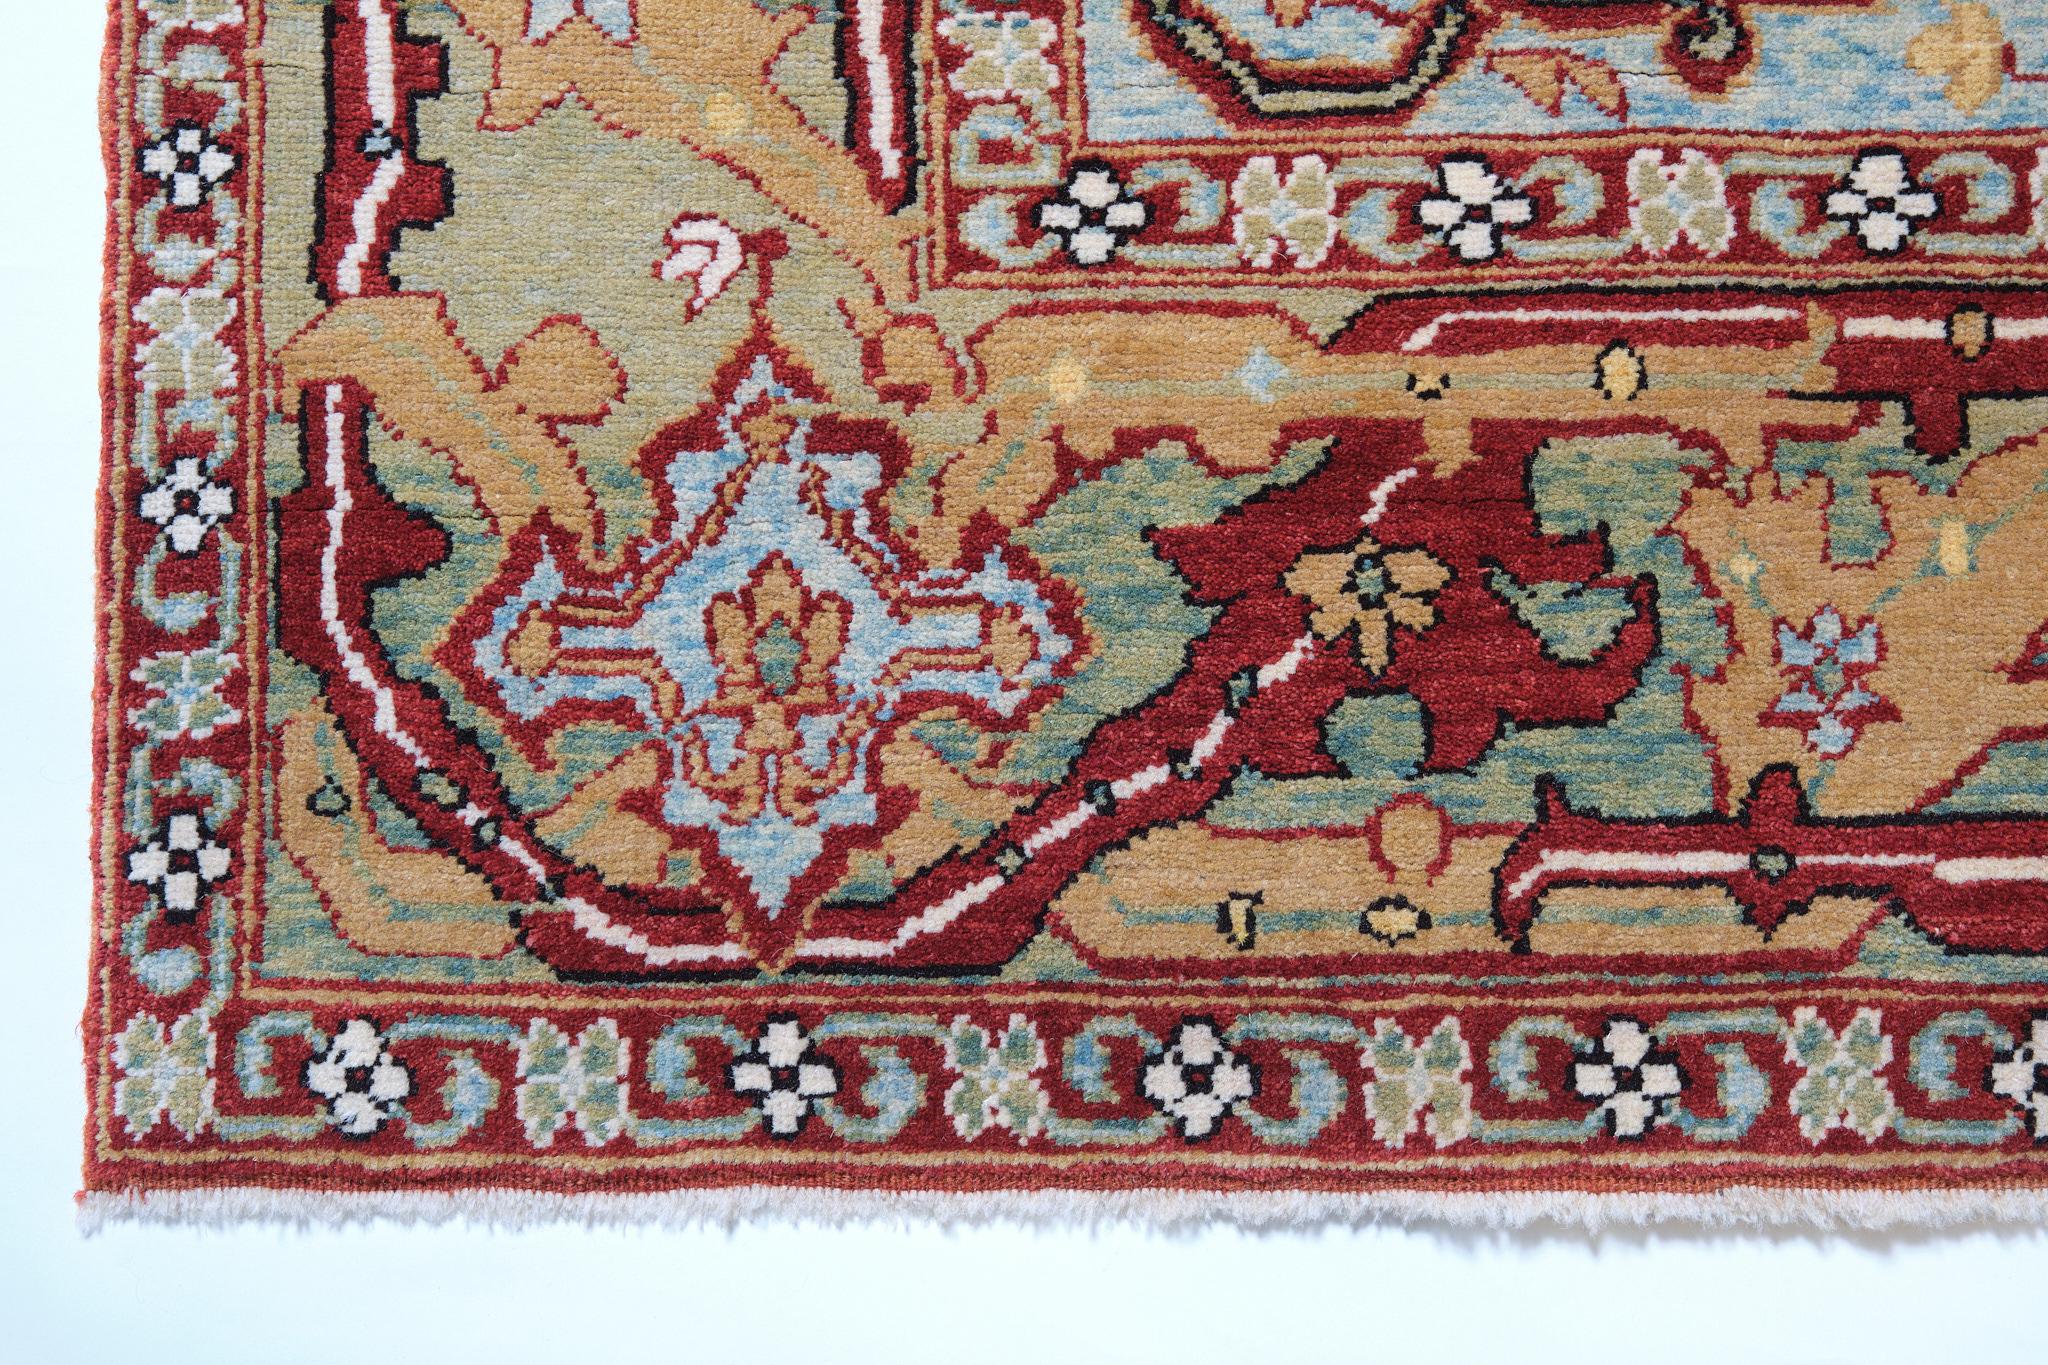 The source of the rug comes from the book Antique Rugs of Kurdistan A Historical Legacy of Woven Art, James D. Burns, 2002 nr.33. This is a fine Kurdish workshop rug with split-palmette and trefoil arabesque patterns designed Mid-19th Century rug